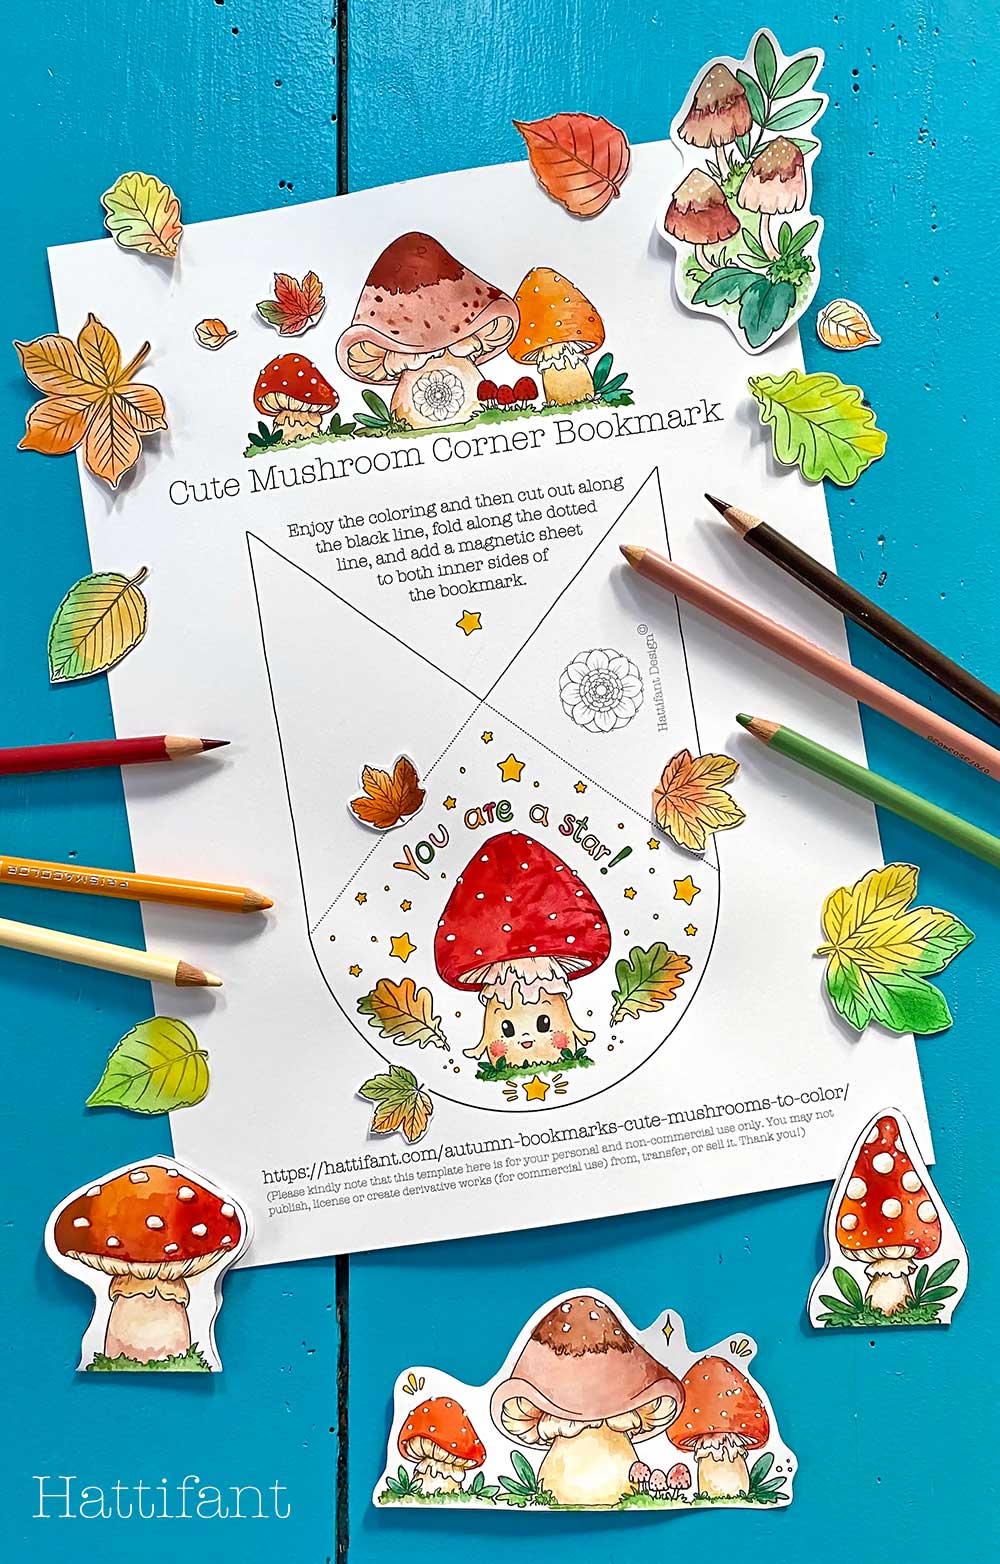 The cutest Mushroom Bookmarks ever to color in - Hattifant